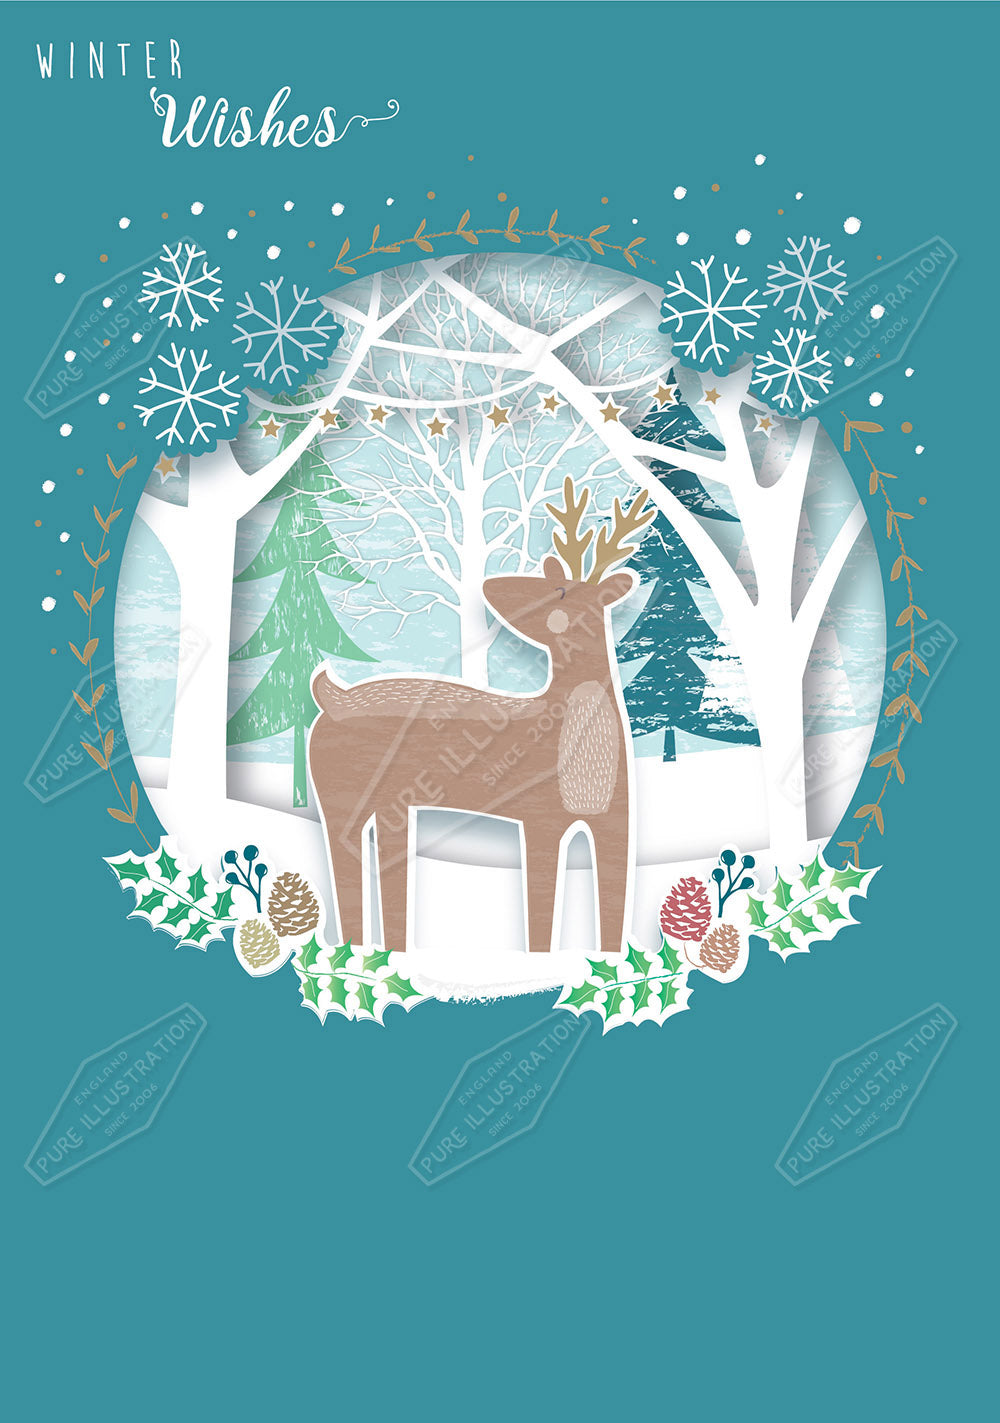 00033627AMC - Stag Christmas Card Design by Amanda McDonough - represented by Pure Art Licensing Agency - Christmas Greeting Card Design